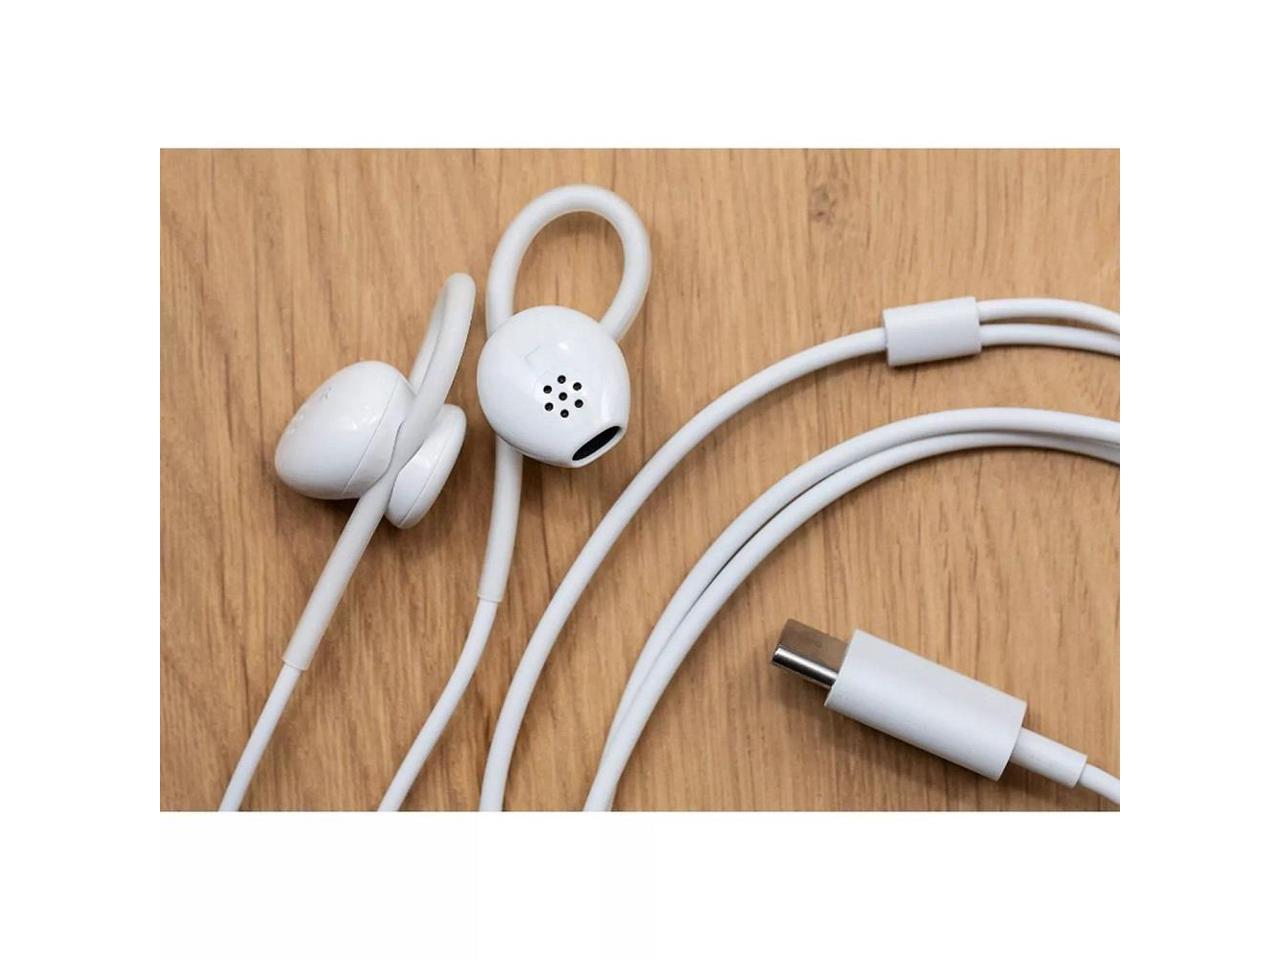 Google Pixel In-Ear Wired Digital Earbuds Headset for USB-C Phones - White